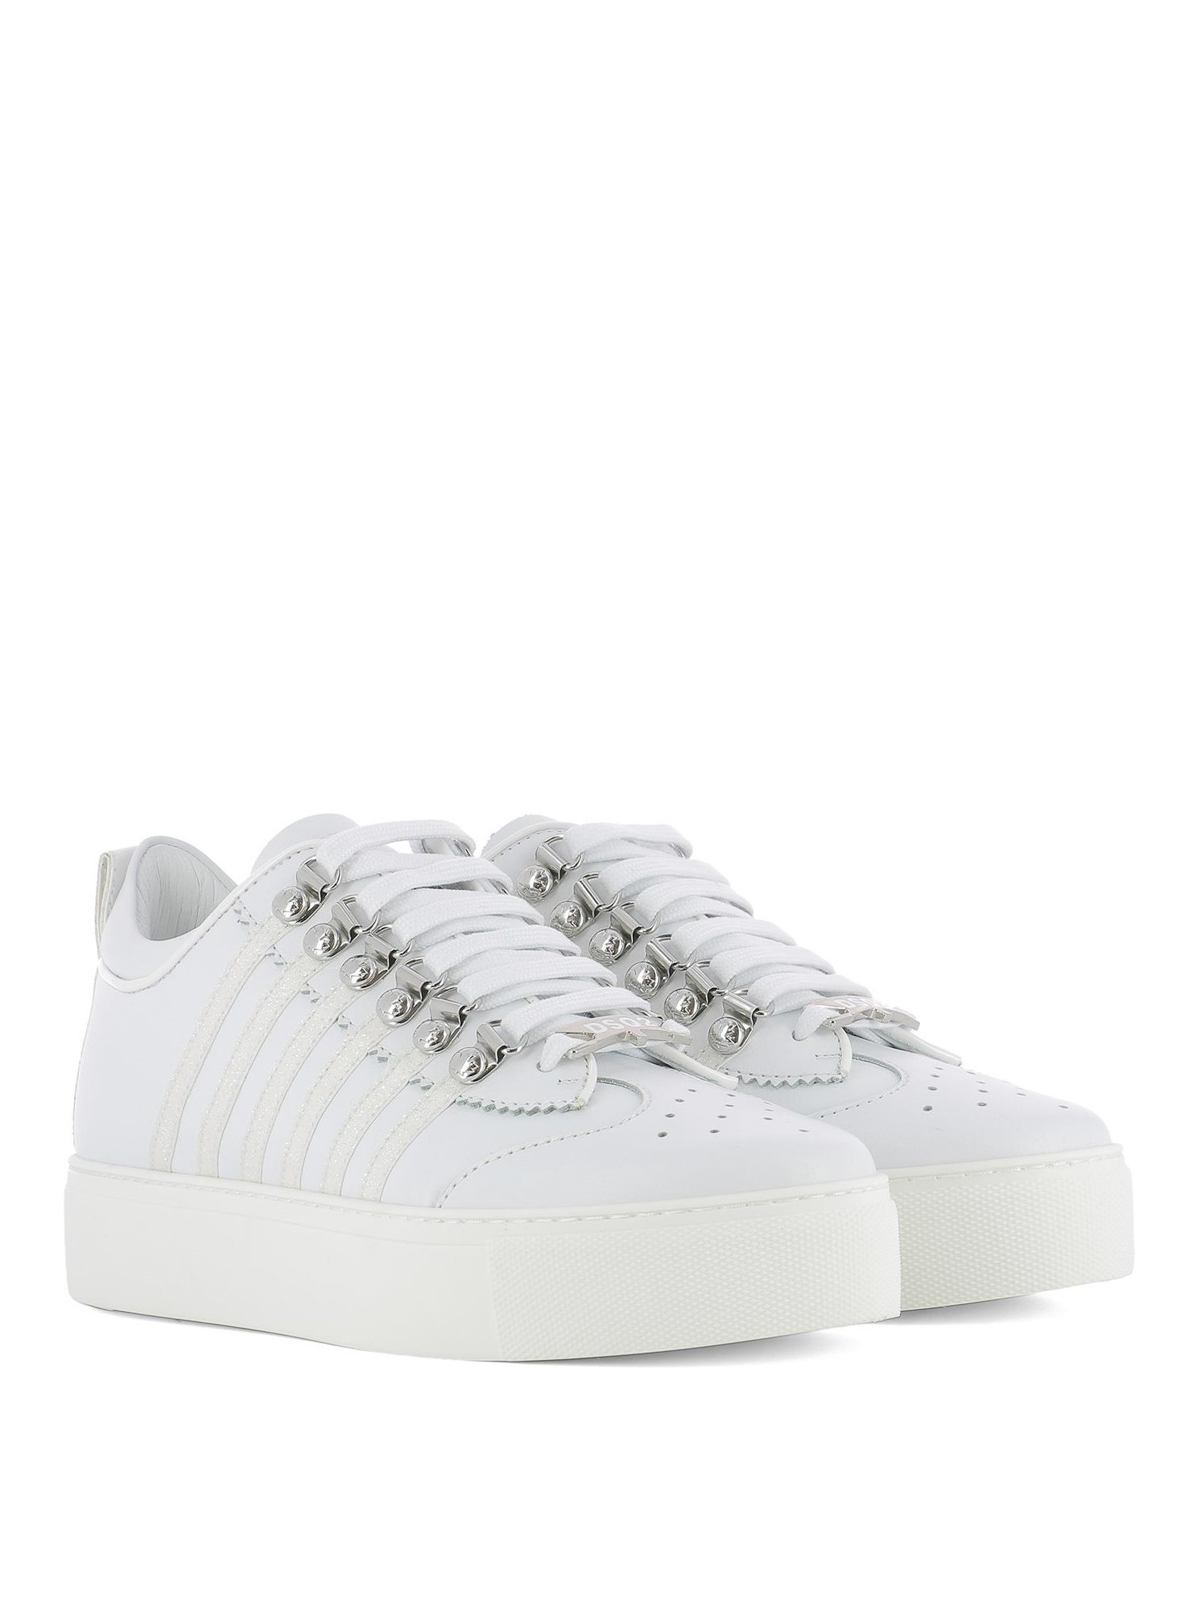 dsquared2 striped sneakers